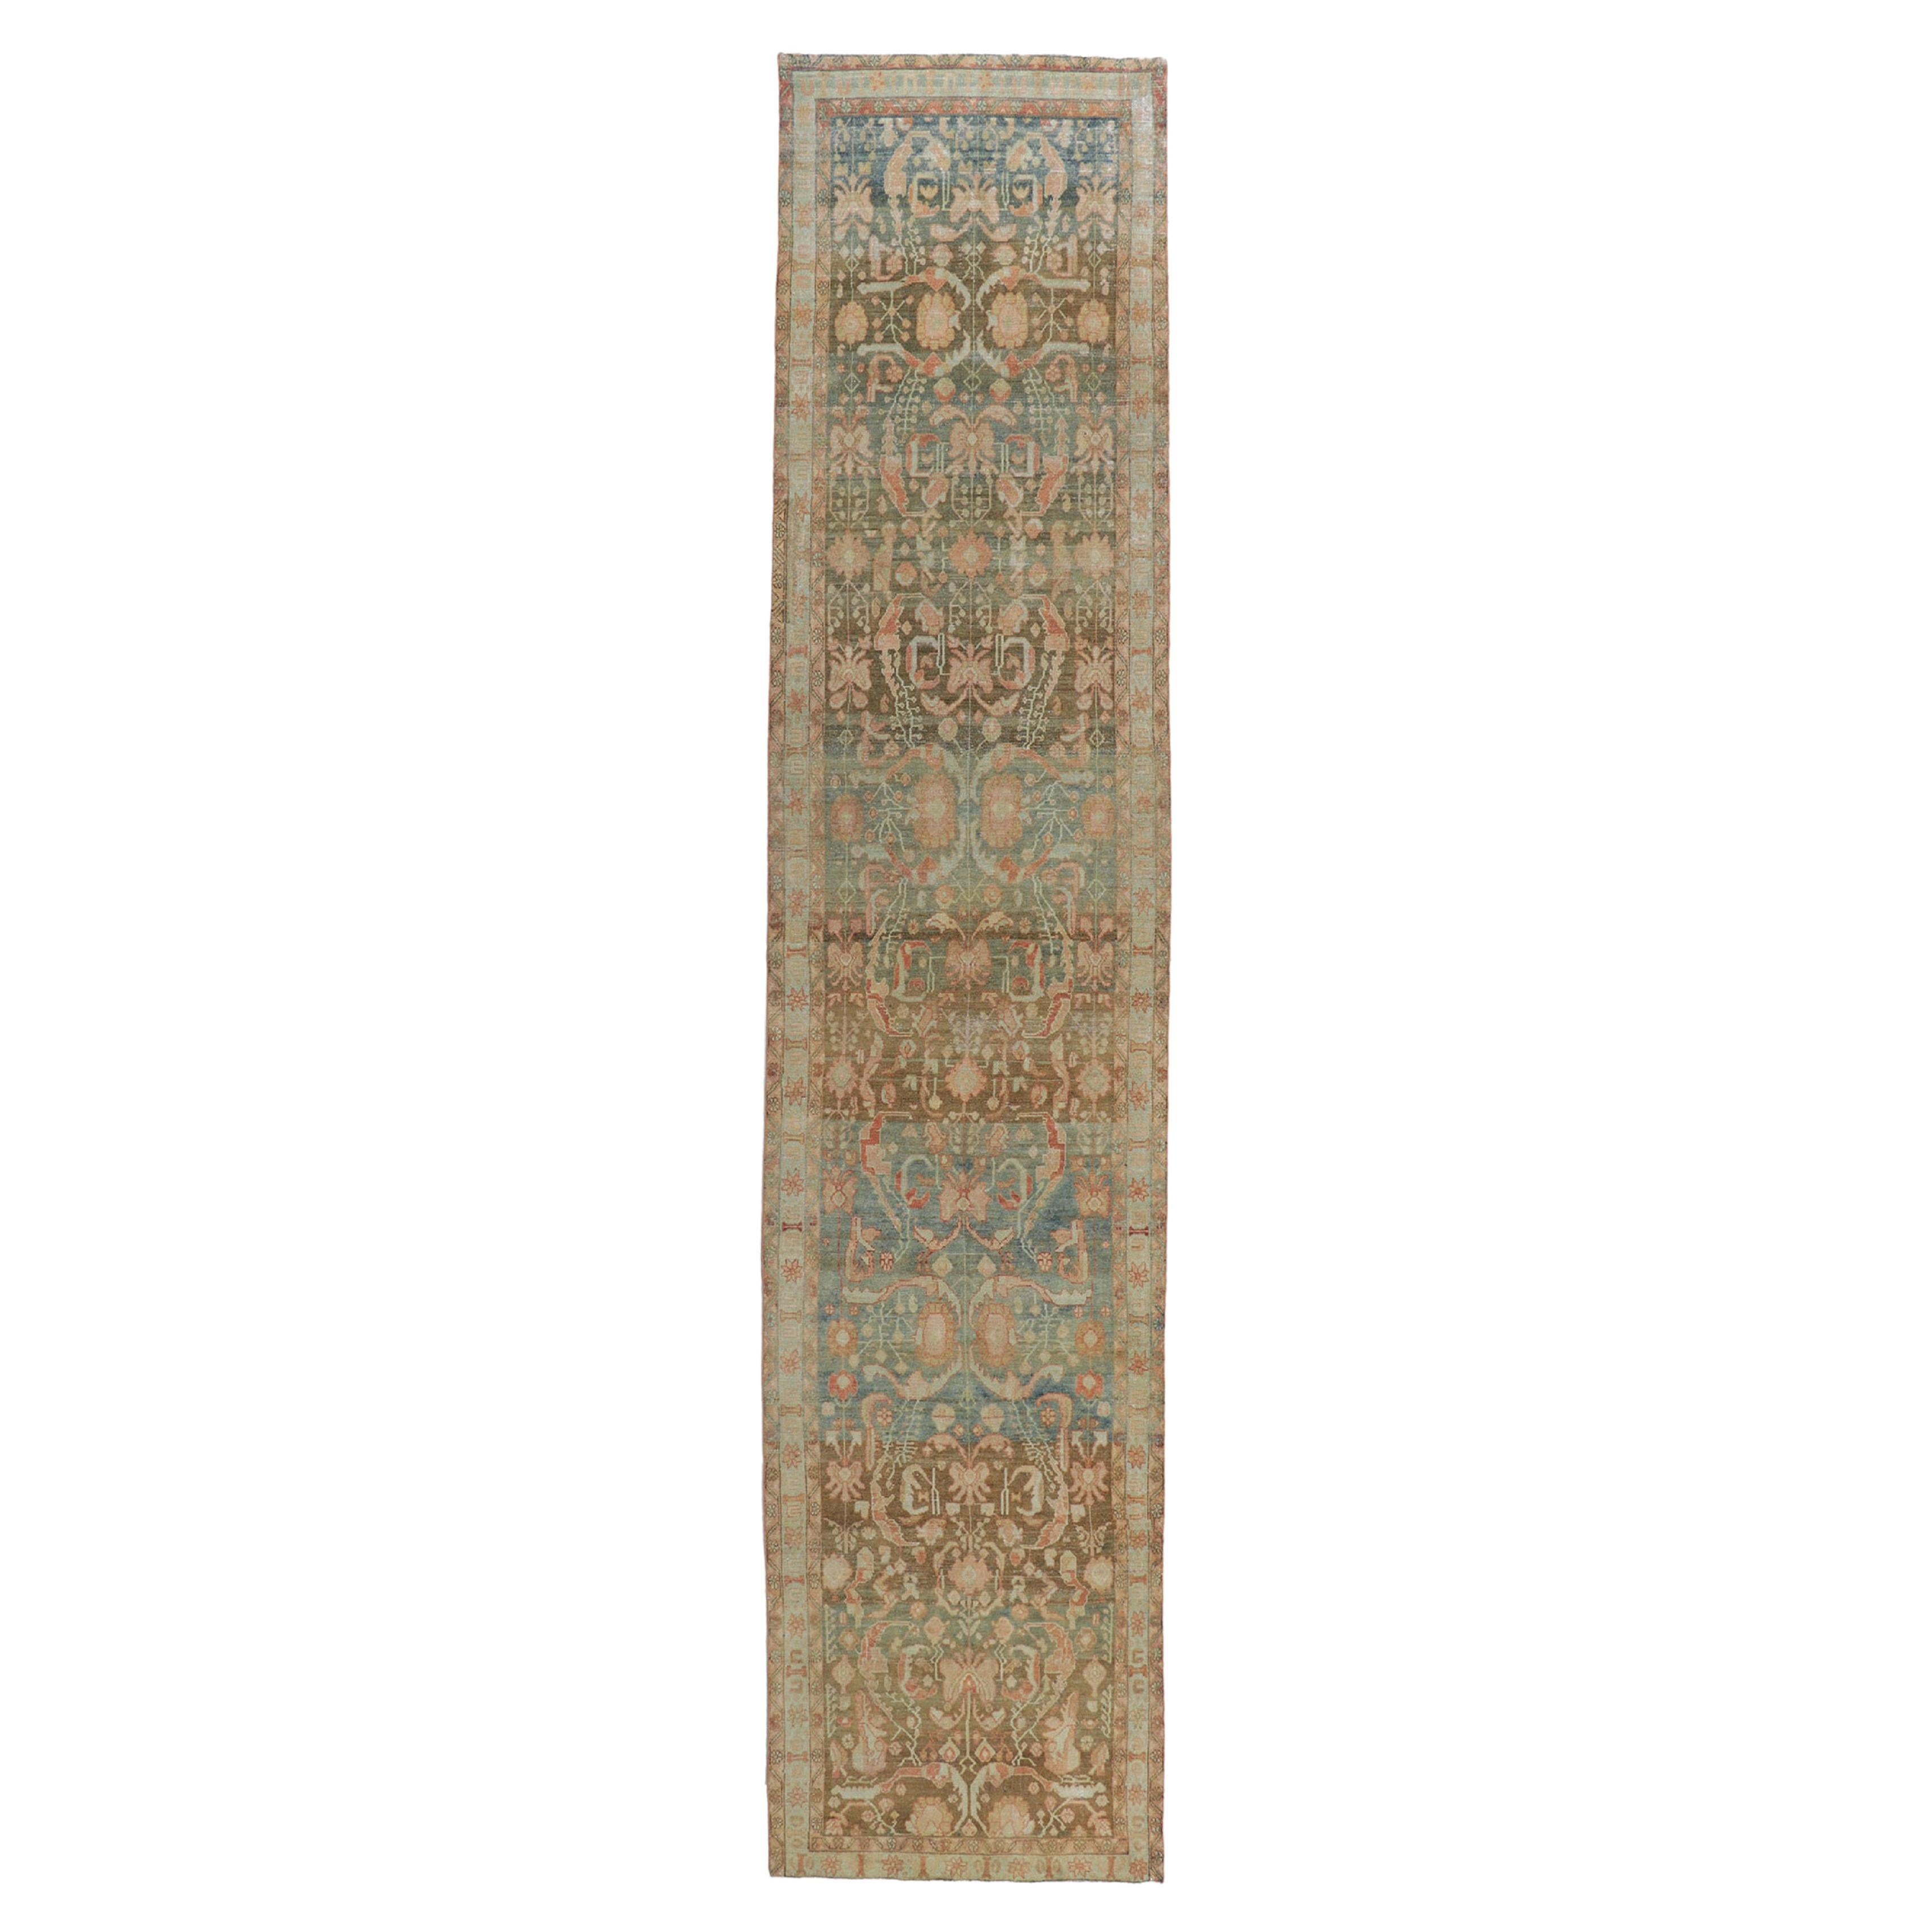 Antique-Worn Persian Malayer Rug, Earth-Tone Elegance Meets Relaxed Refinement For Sale